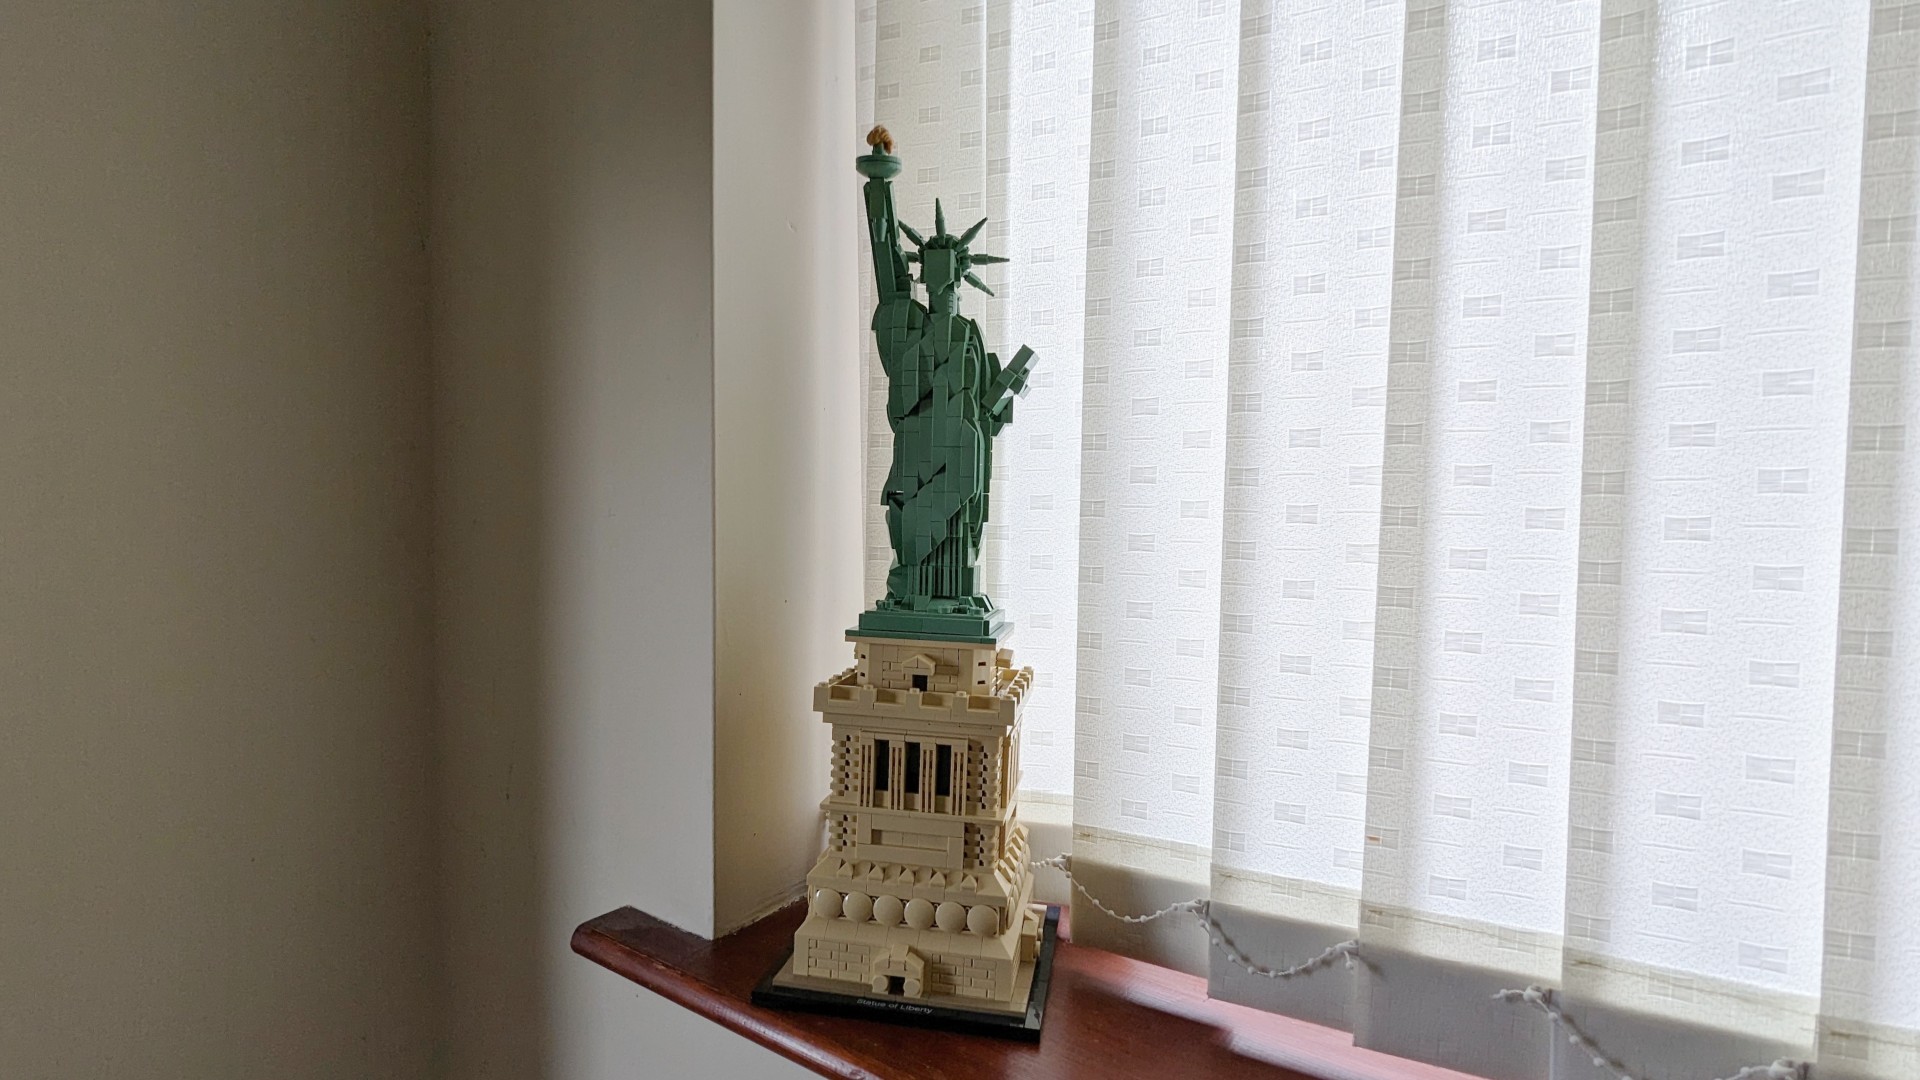 Lego Architecture Statue of Liberty review